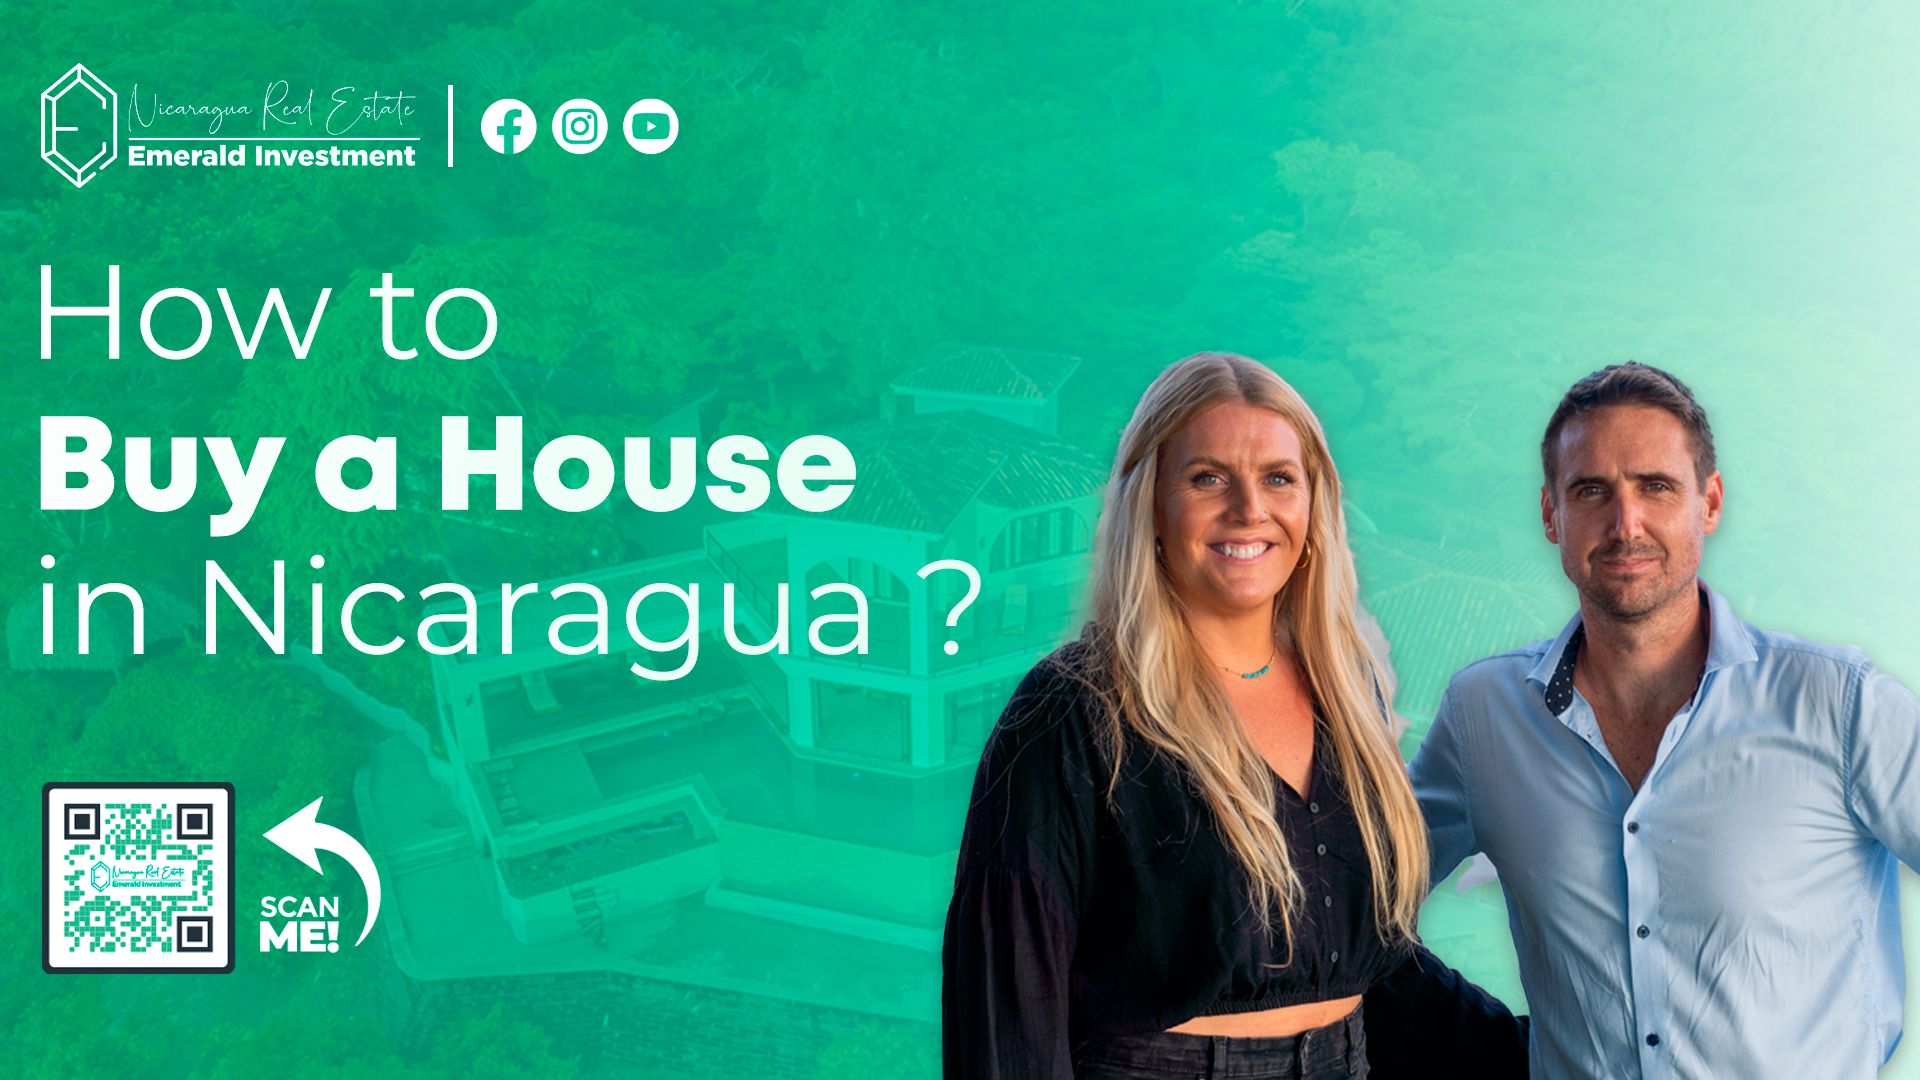 How to Buy a House in Nicaragua